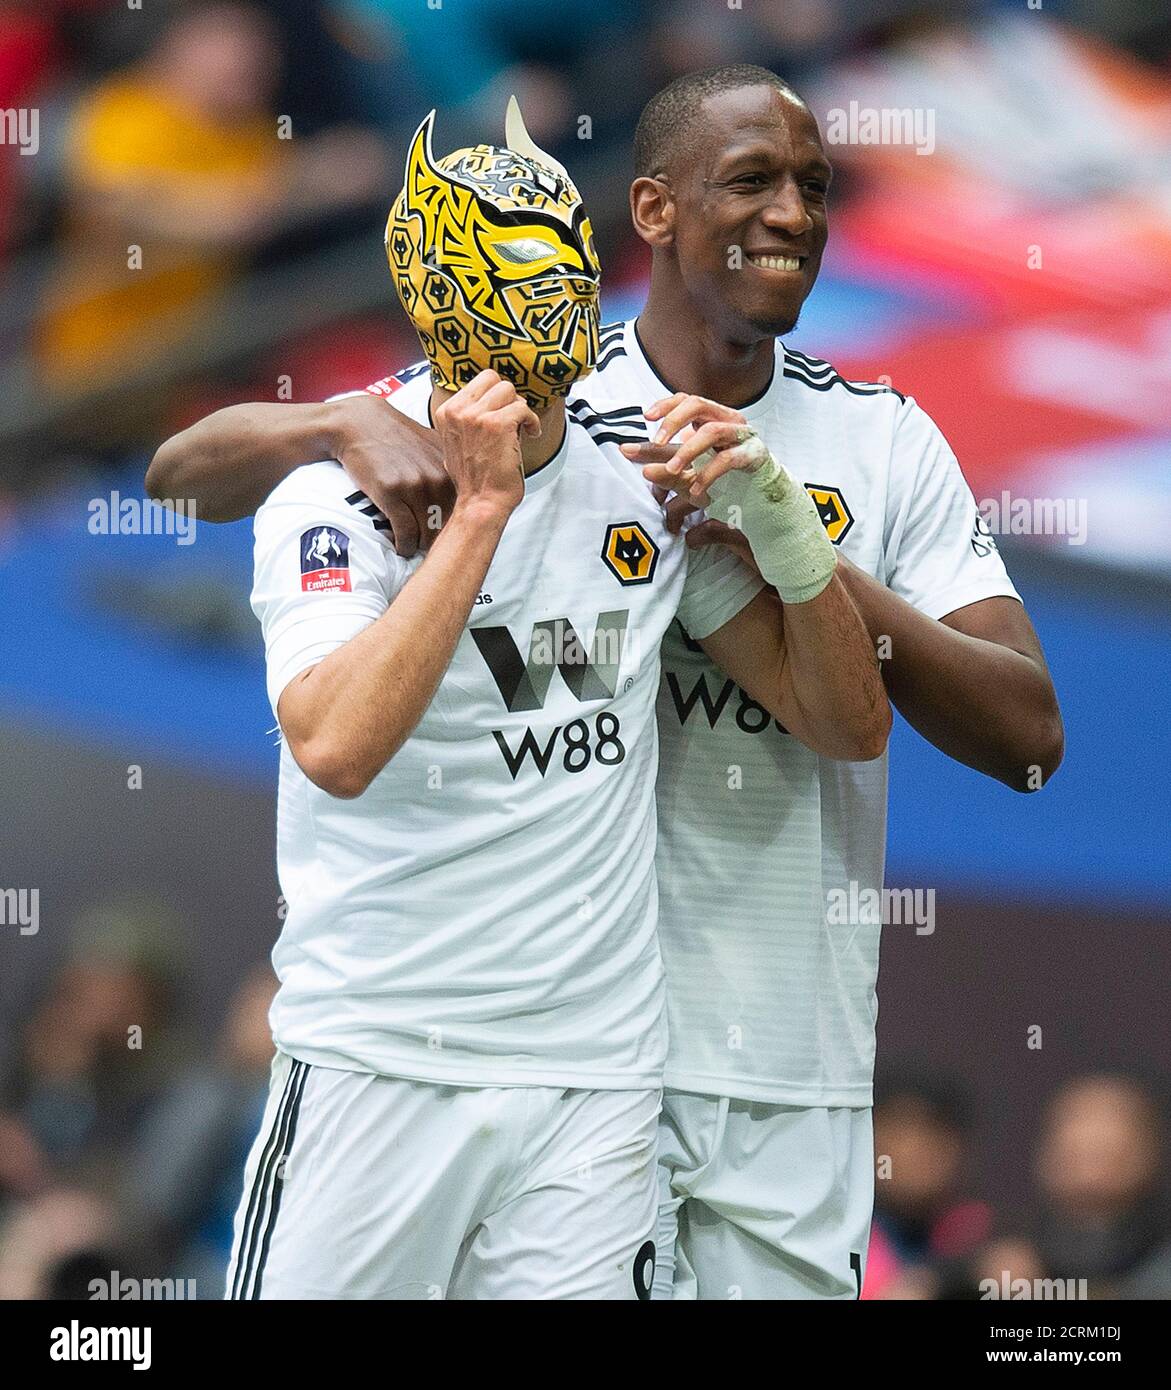 Wolverhampton's Raul Jimenez celebrates his second goal by putting on a mask.  Picture Credit : © MARK PAIN / ALAMY Stock Photo - Alamy